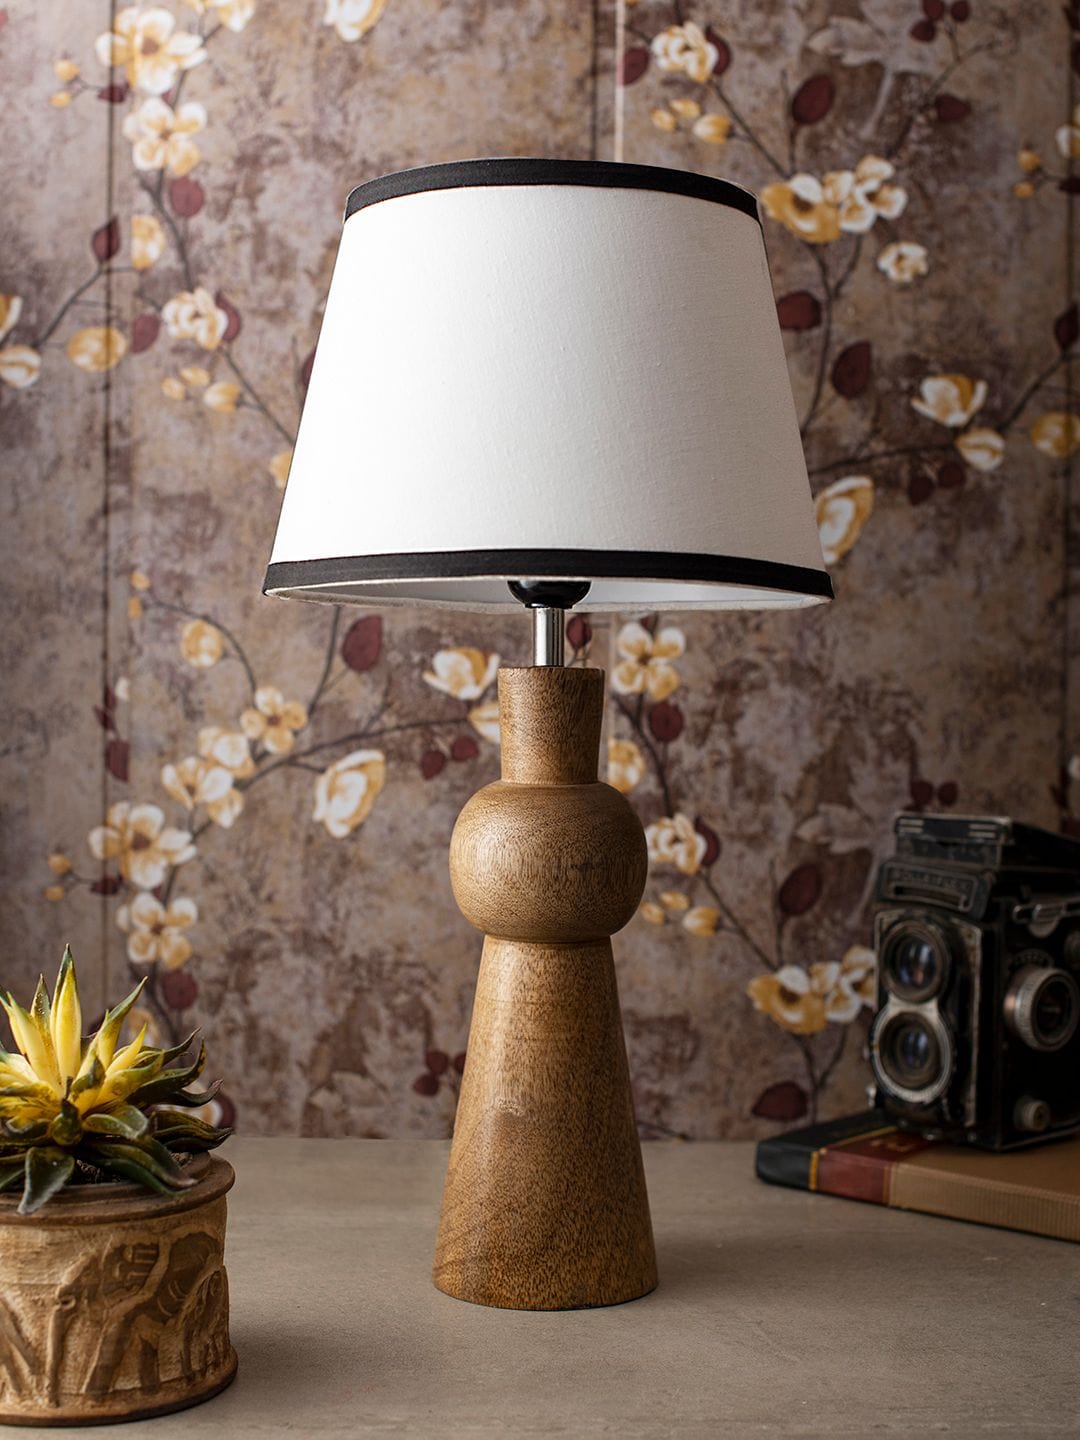 Wooden Skirt Lamp with White Cotton Shade